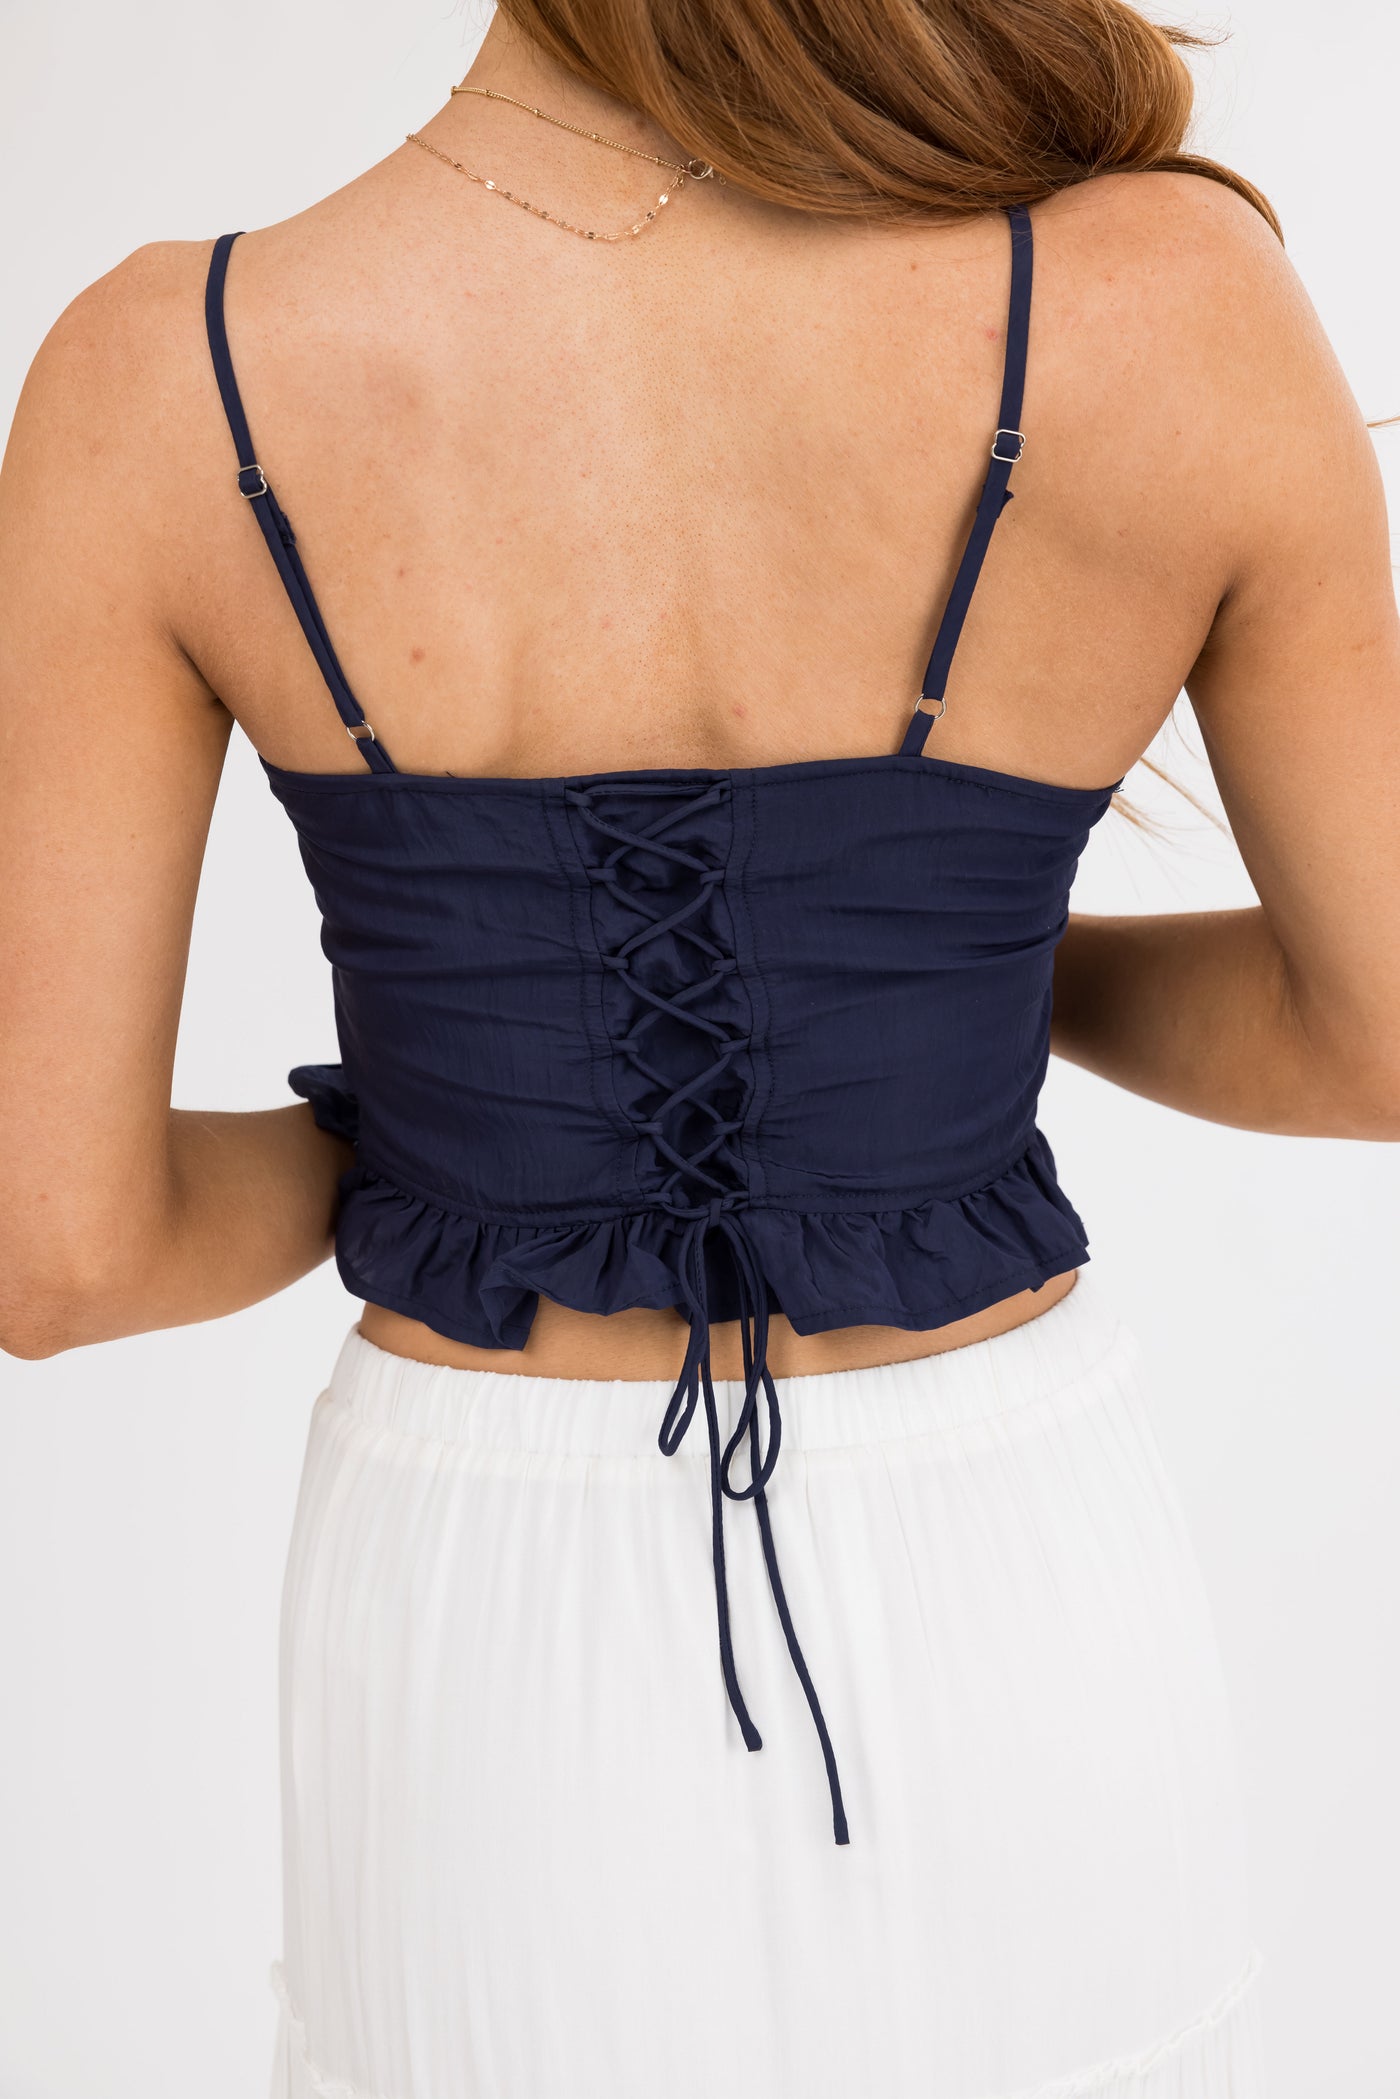 Navy Corset Tank Top with Lace Details